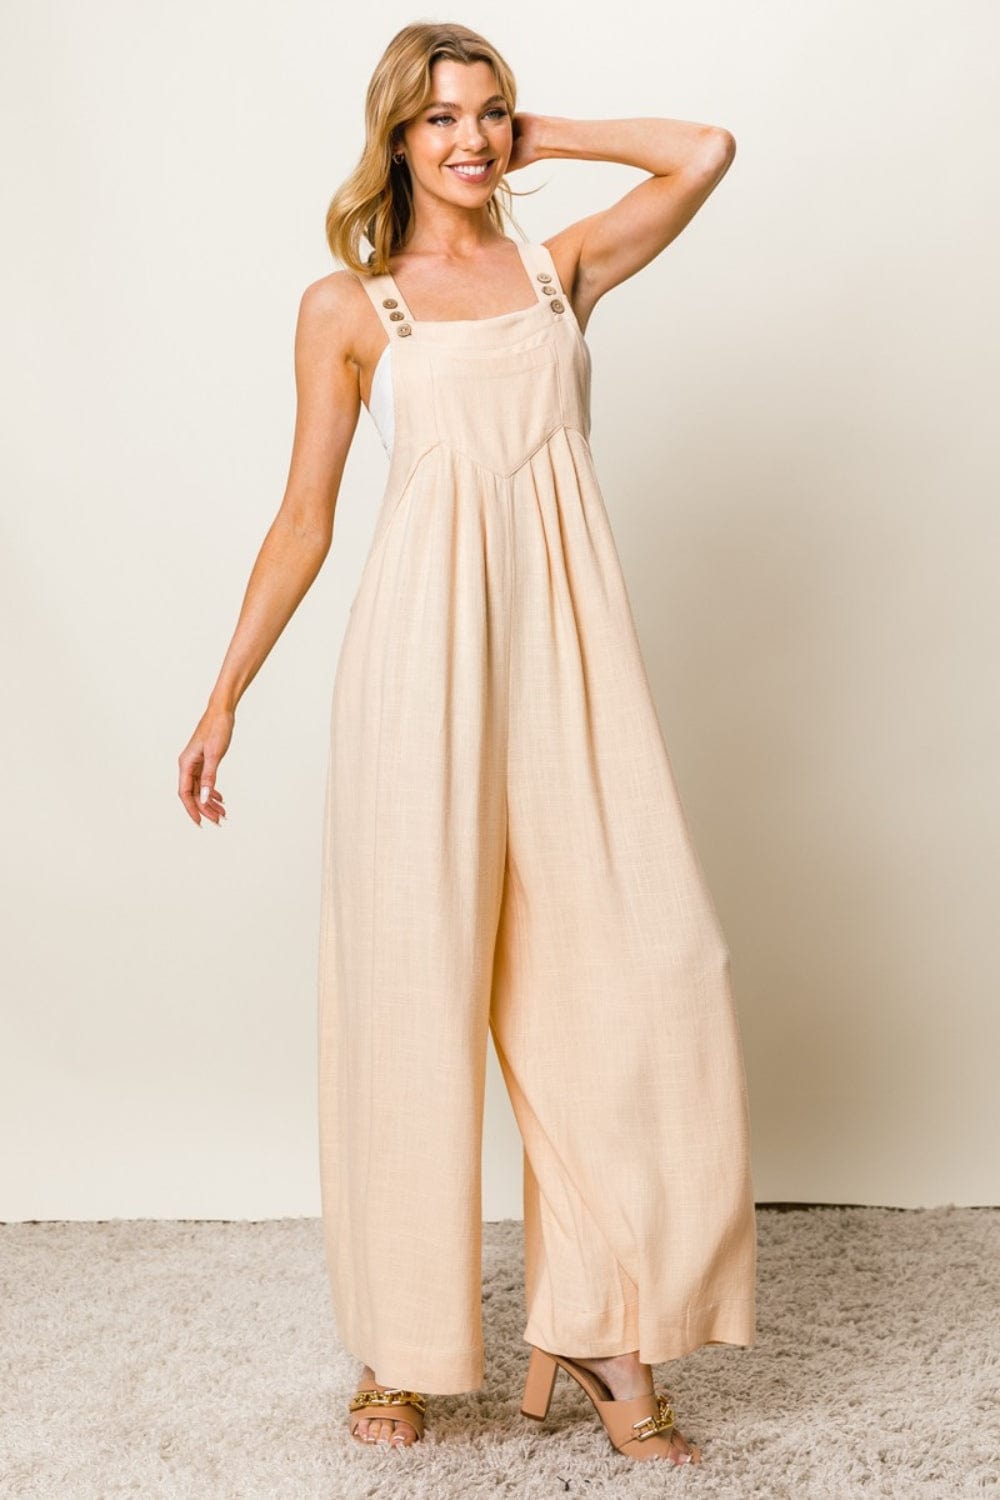 The802Gypsy Jumpsuits & Rompers ❤️GYPSY-BiBi-Texture Sleeveless Wide Leg Jumpsuit